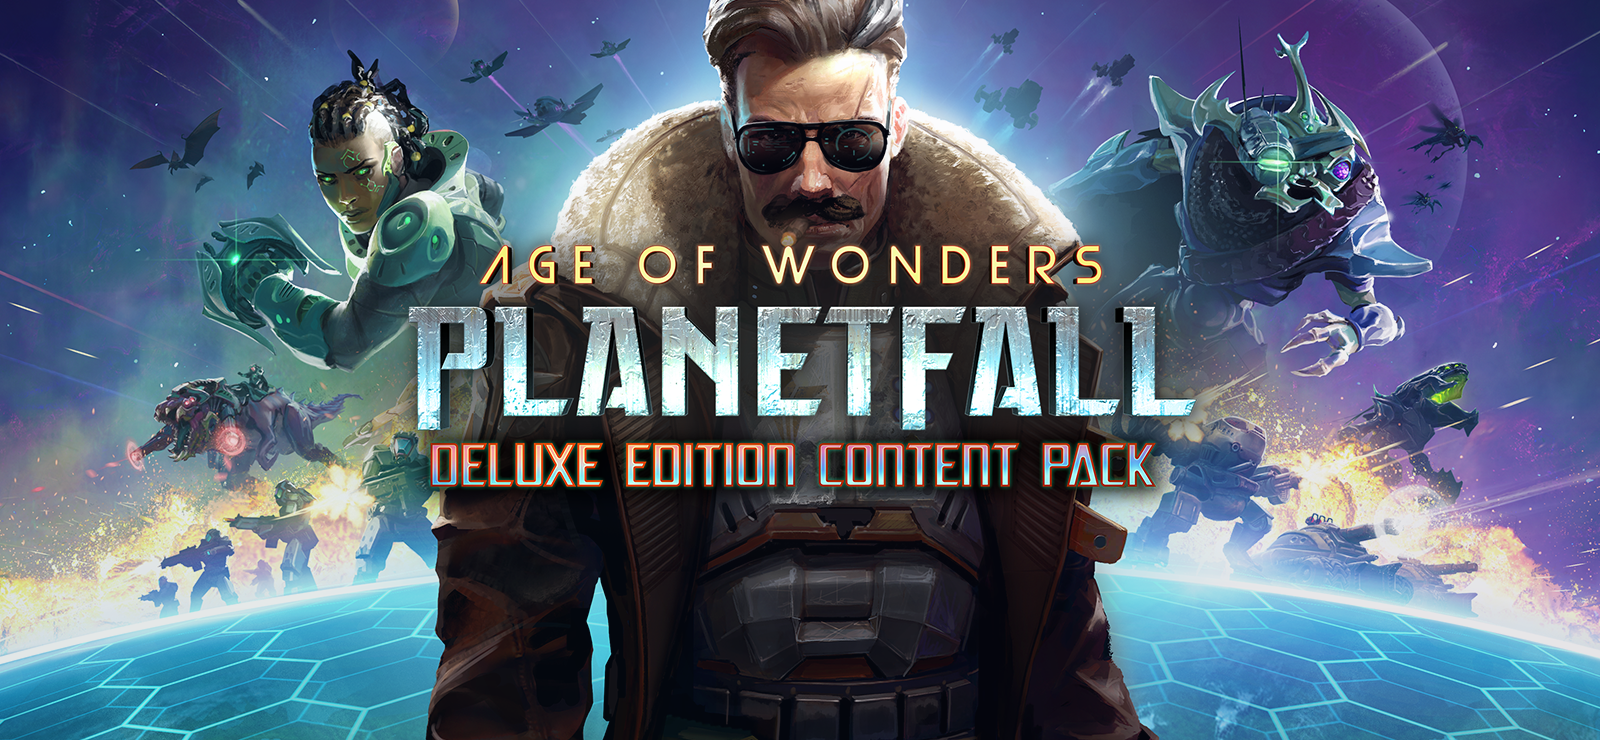 Age Of Wonders: Planetfall - Deluxe Edition Content Pack